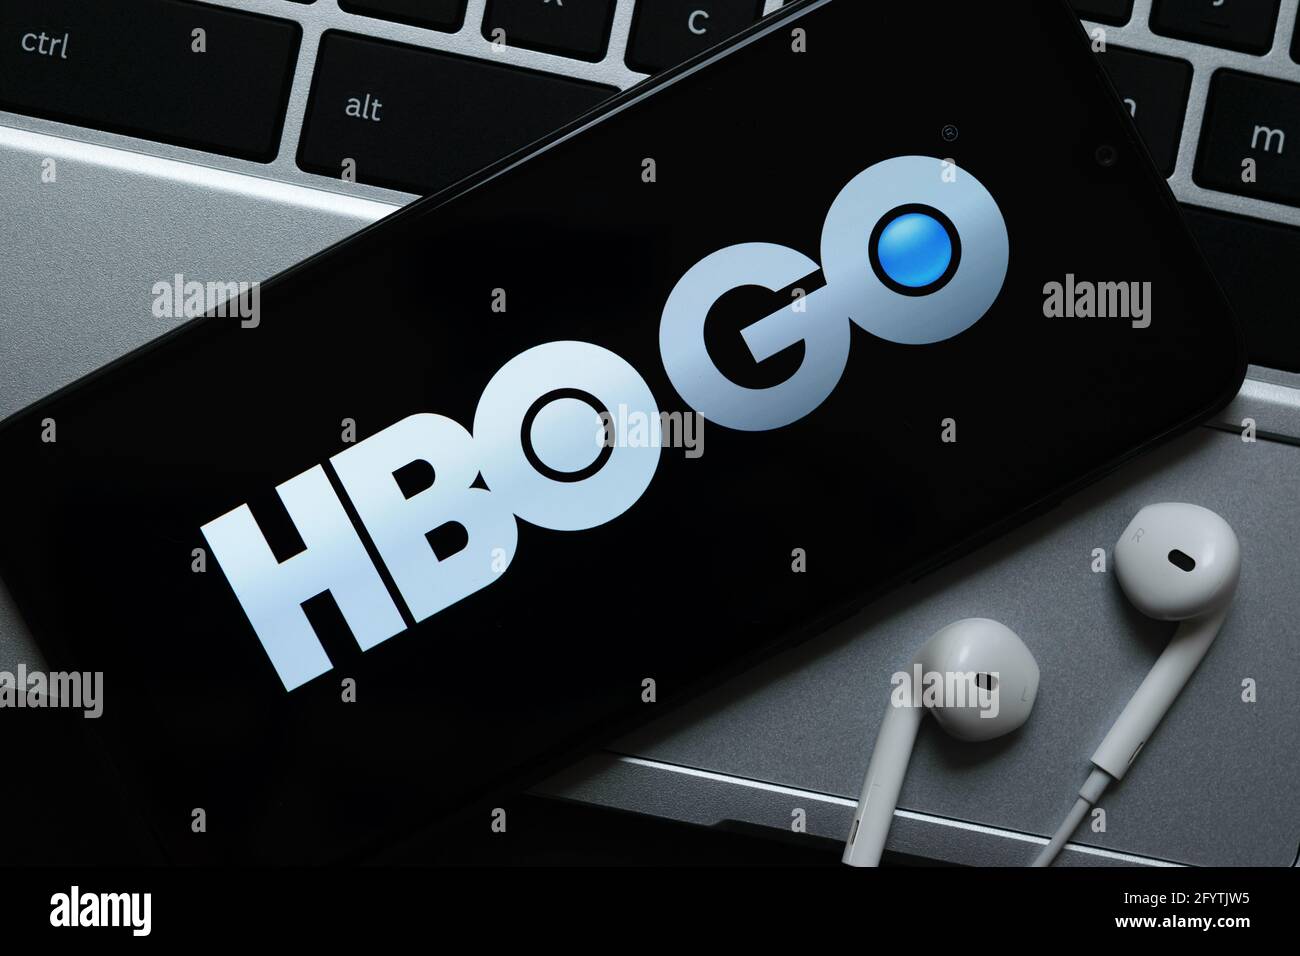 Krakow, Poland - October 07, 2020: HBO GO application sign on the smartphone screen. HBO GO is a famous provider of Internet streaming  service for wa Stock Photo